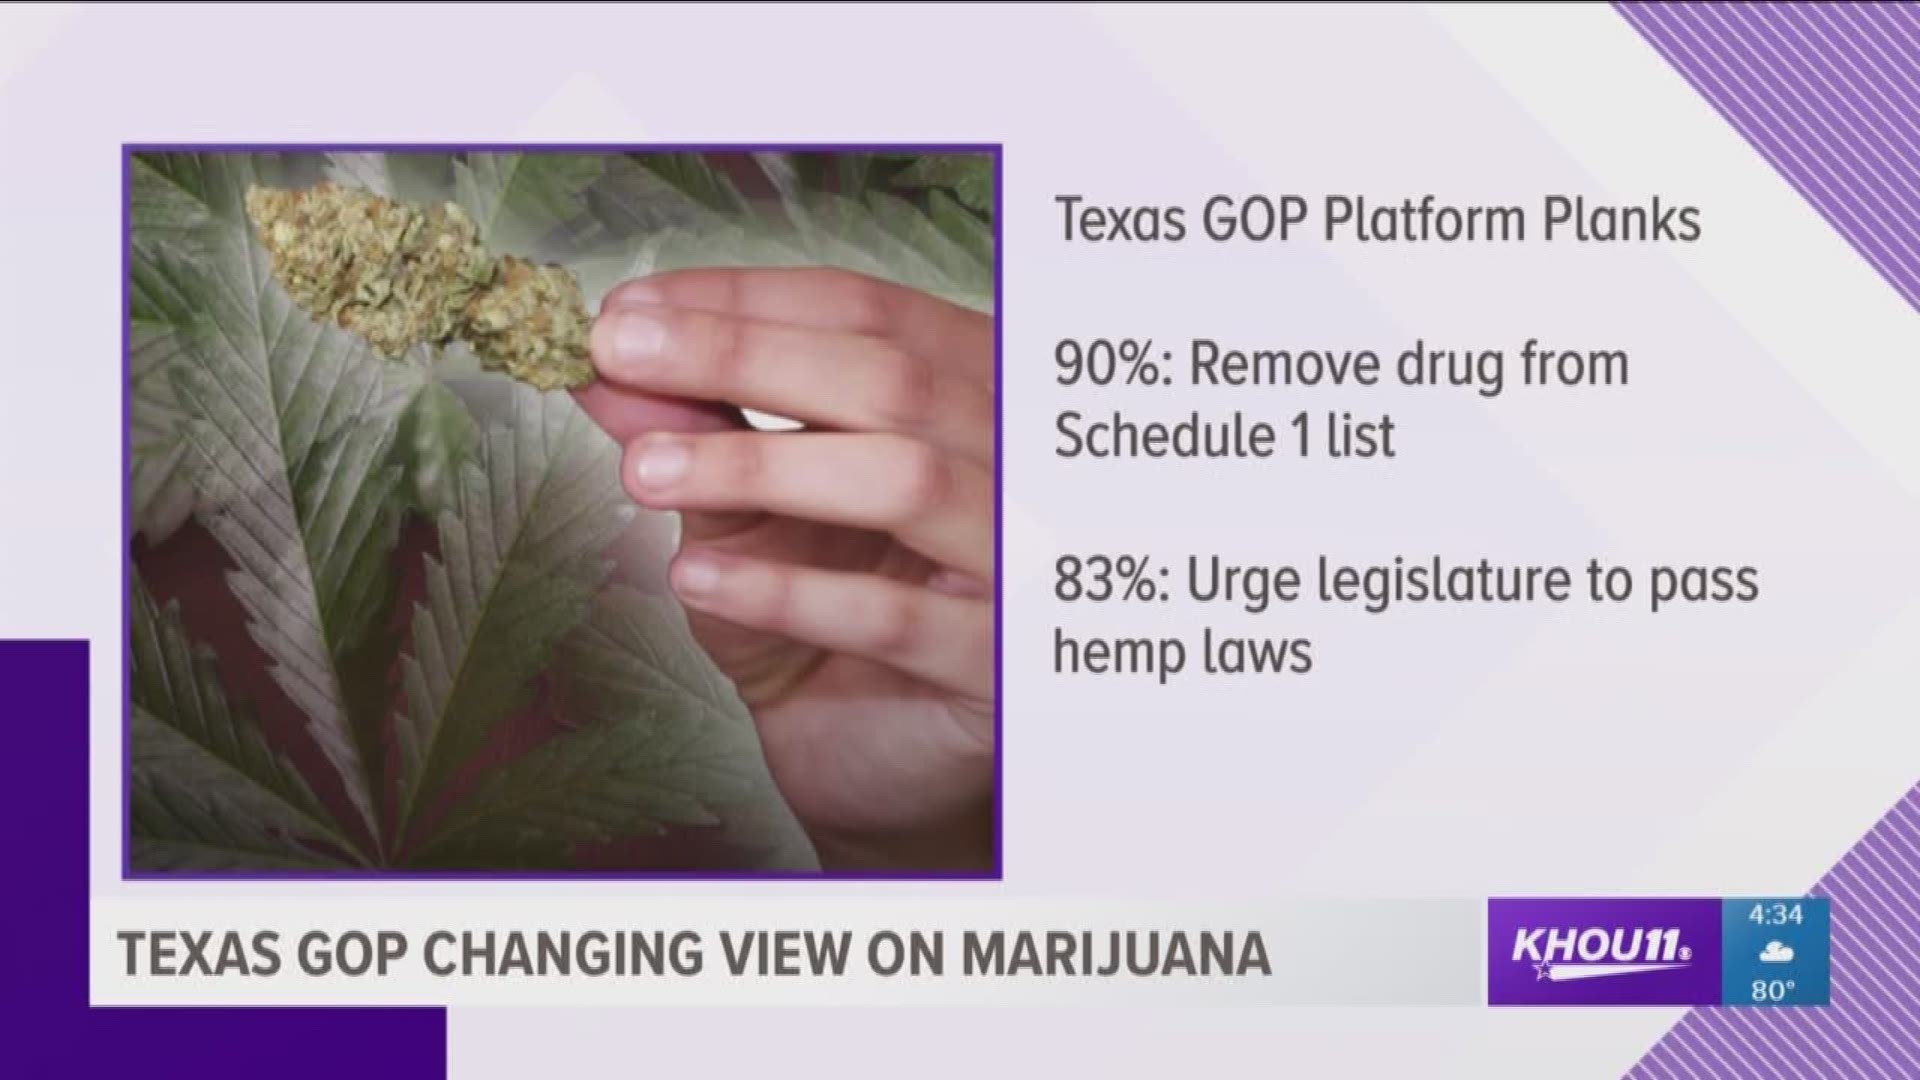 Over the weekend, delegates at the Texas Republican Party Convention voted to take steps to decriminalize marijuana. 